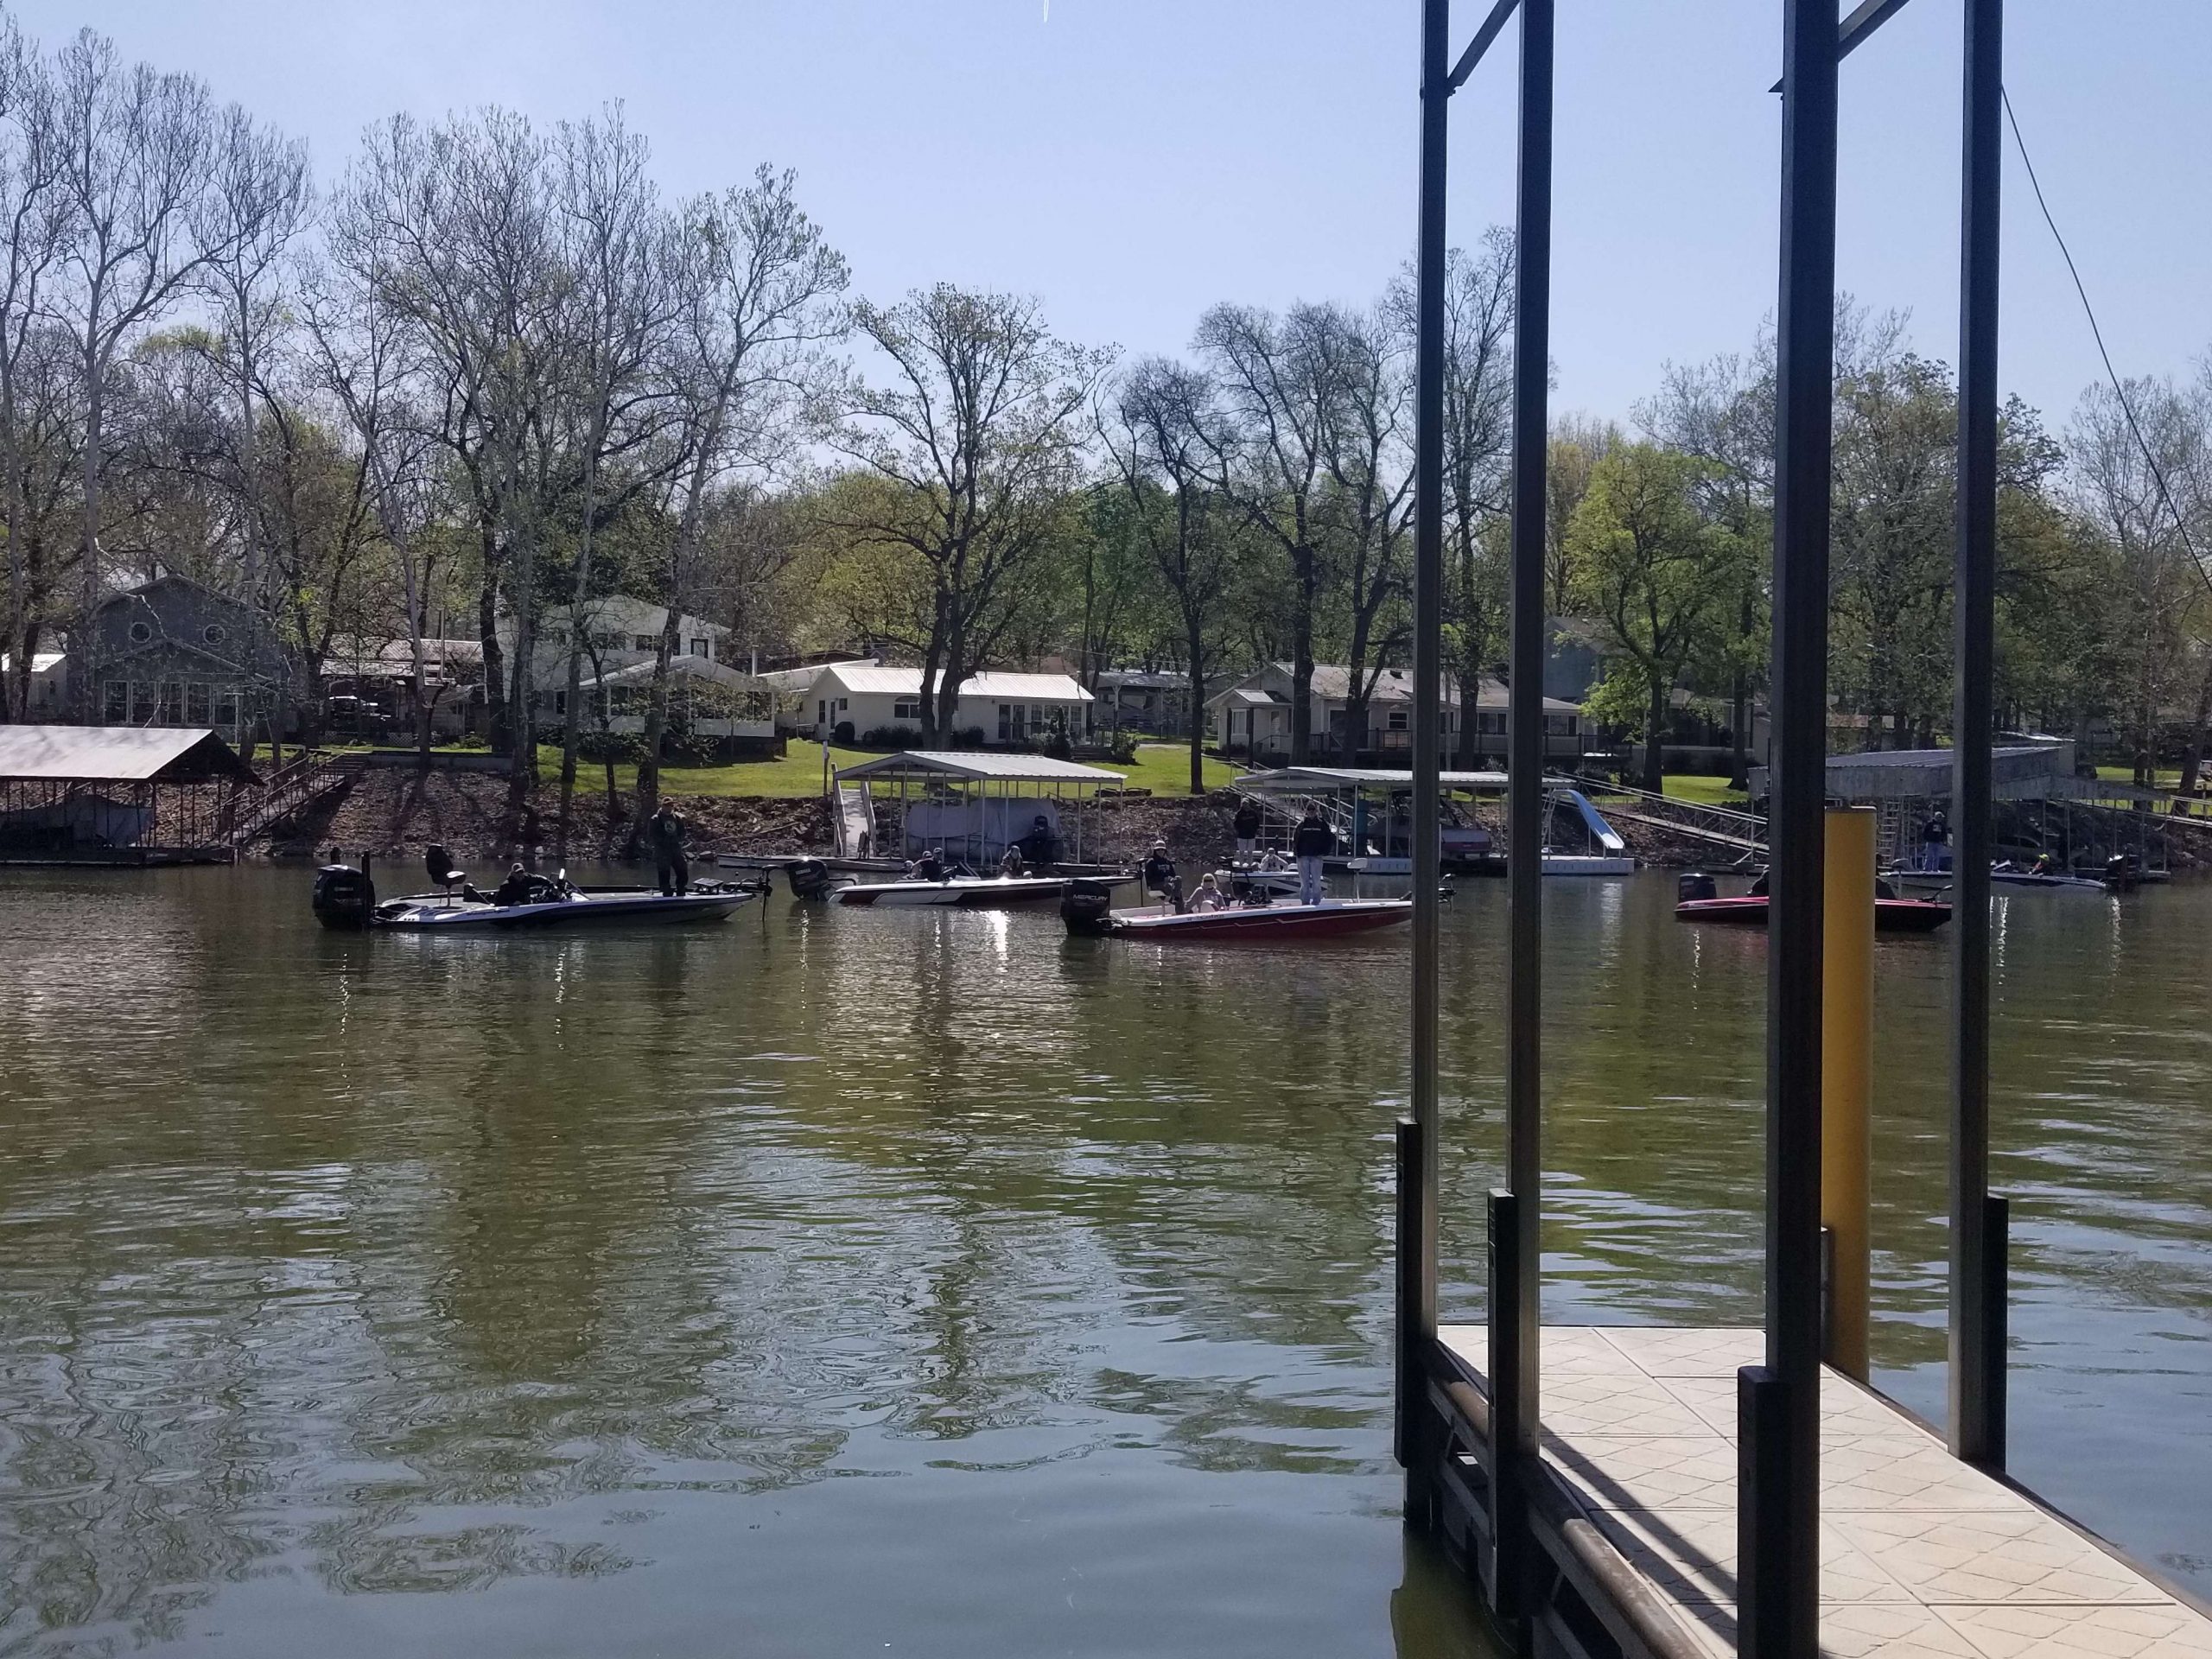 Pay check Saturday coupled with beautiful weather has the Grand Lake locals out in force to watch the best bass fisherman in the world take on their fishery. 